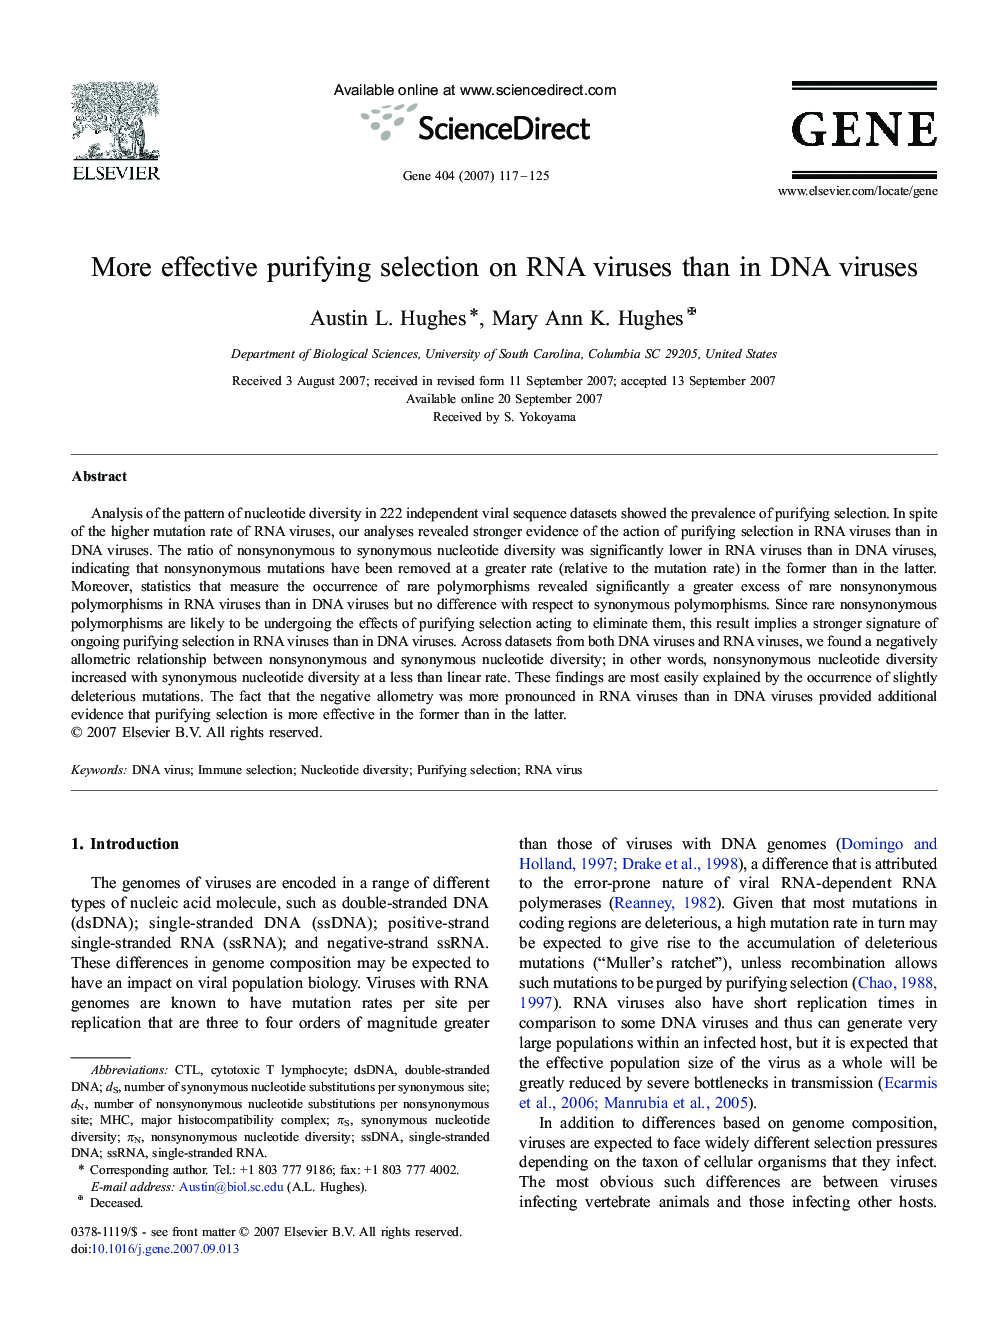 More effective purifying selection on RNA viruses than in DNA viruses